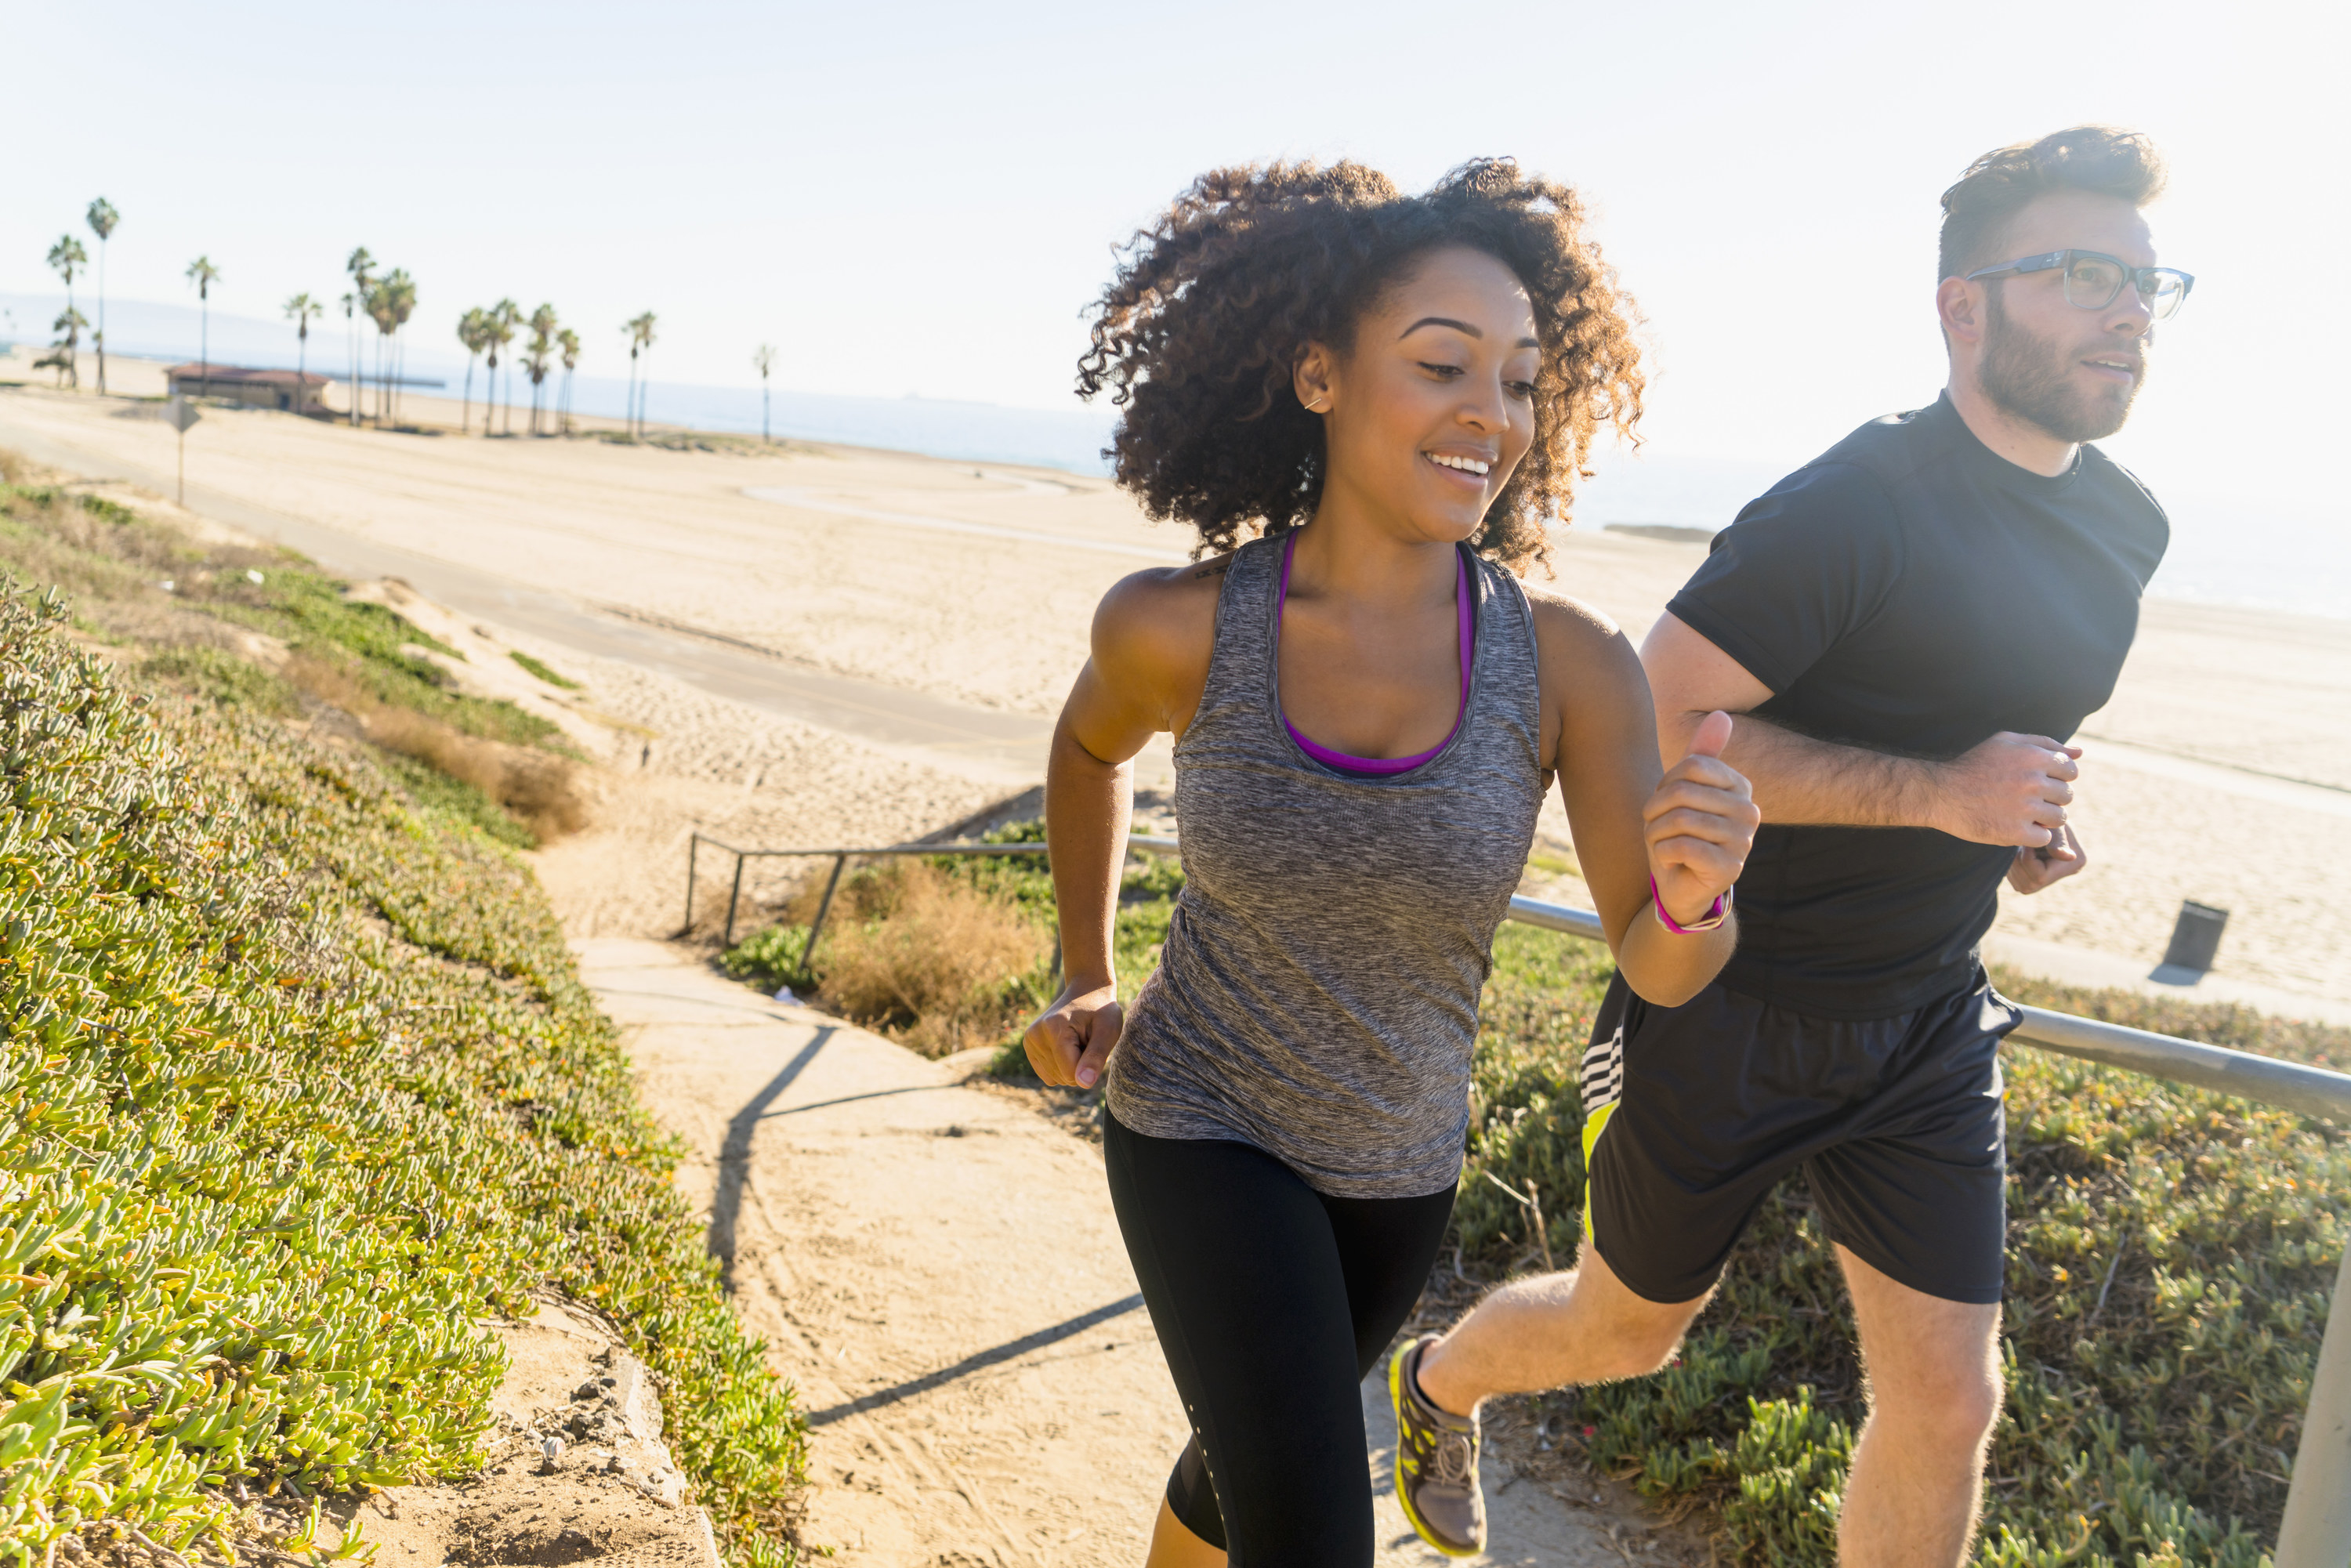 A man and woman run together on a path by the beach.